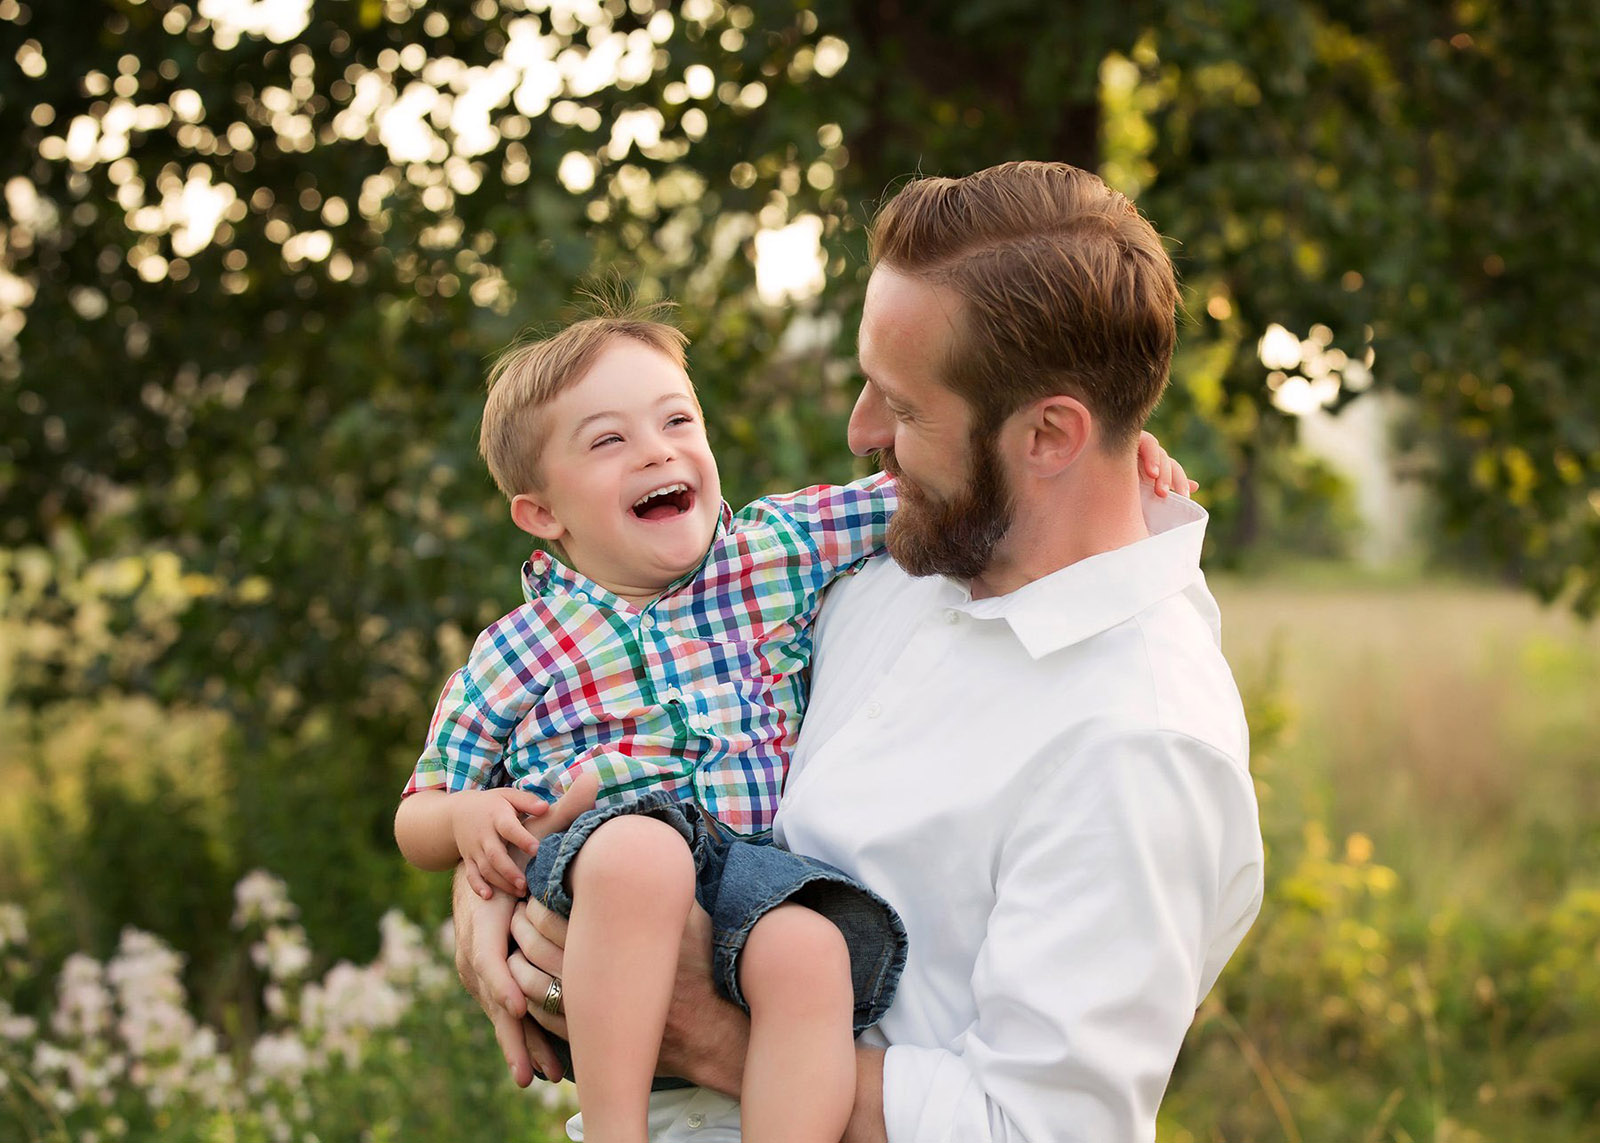 dad holding son in arms smiling and laughing games for happy family photos by leslie crane